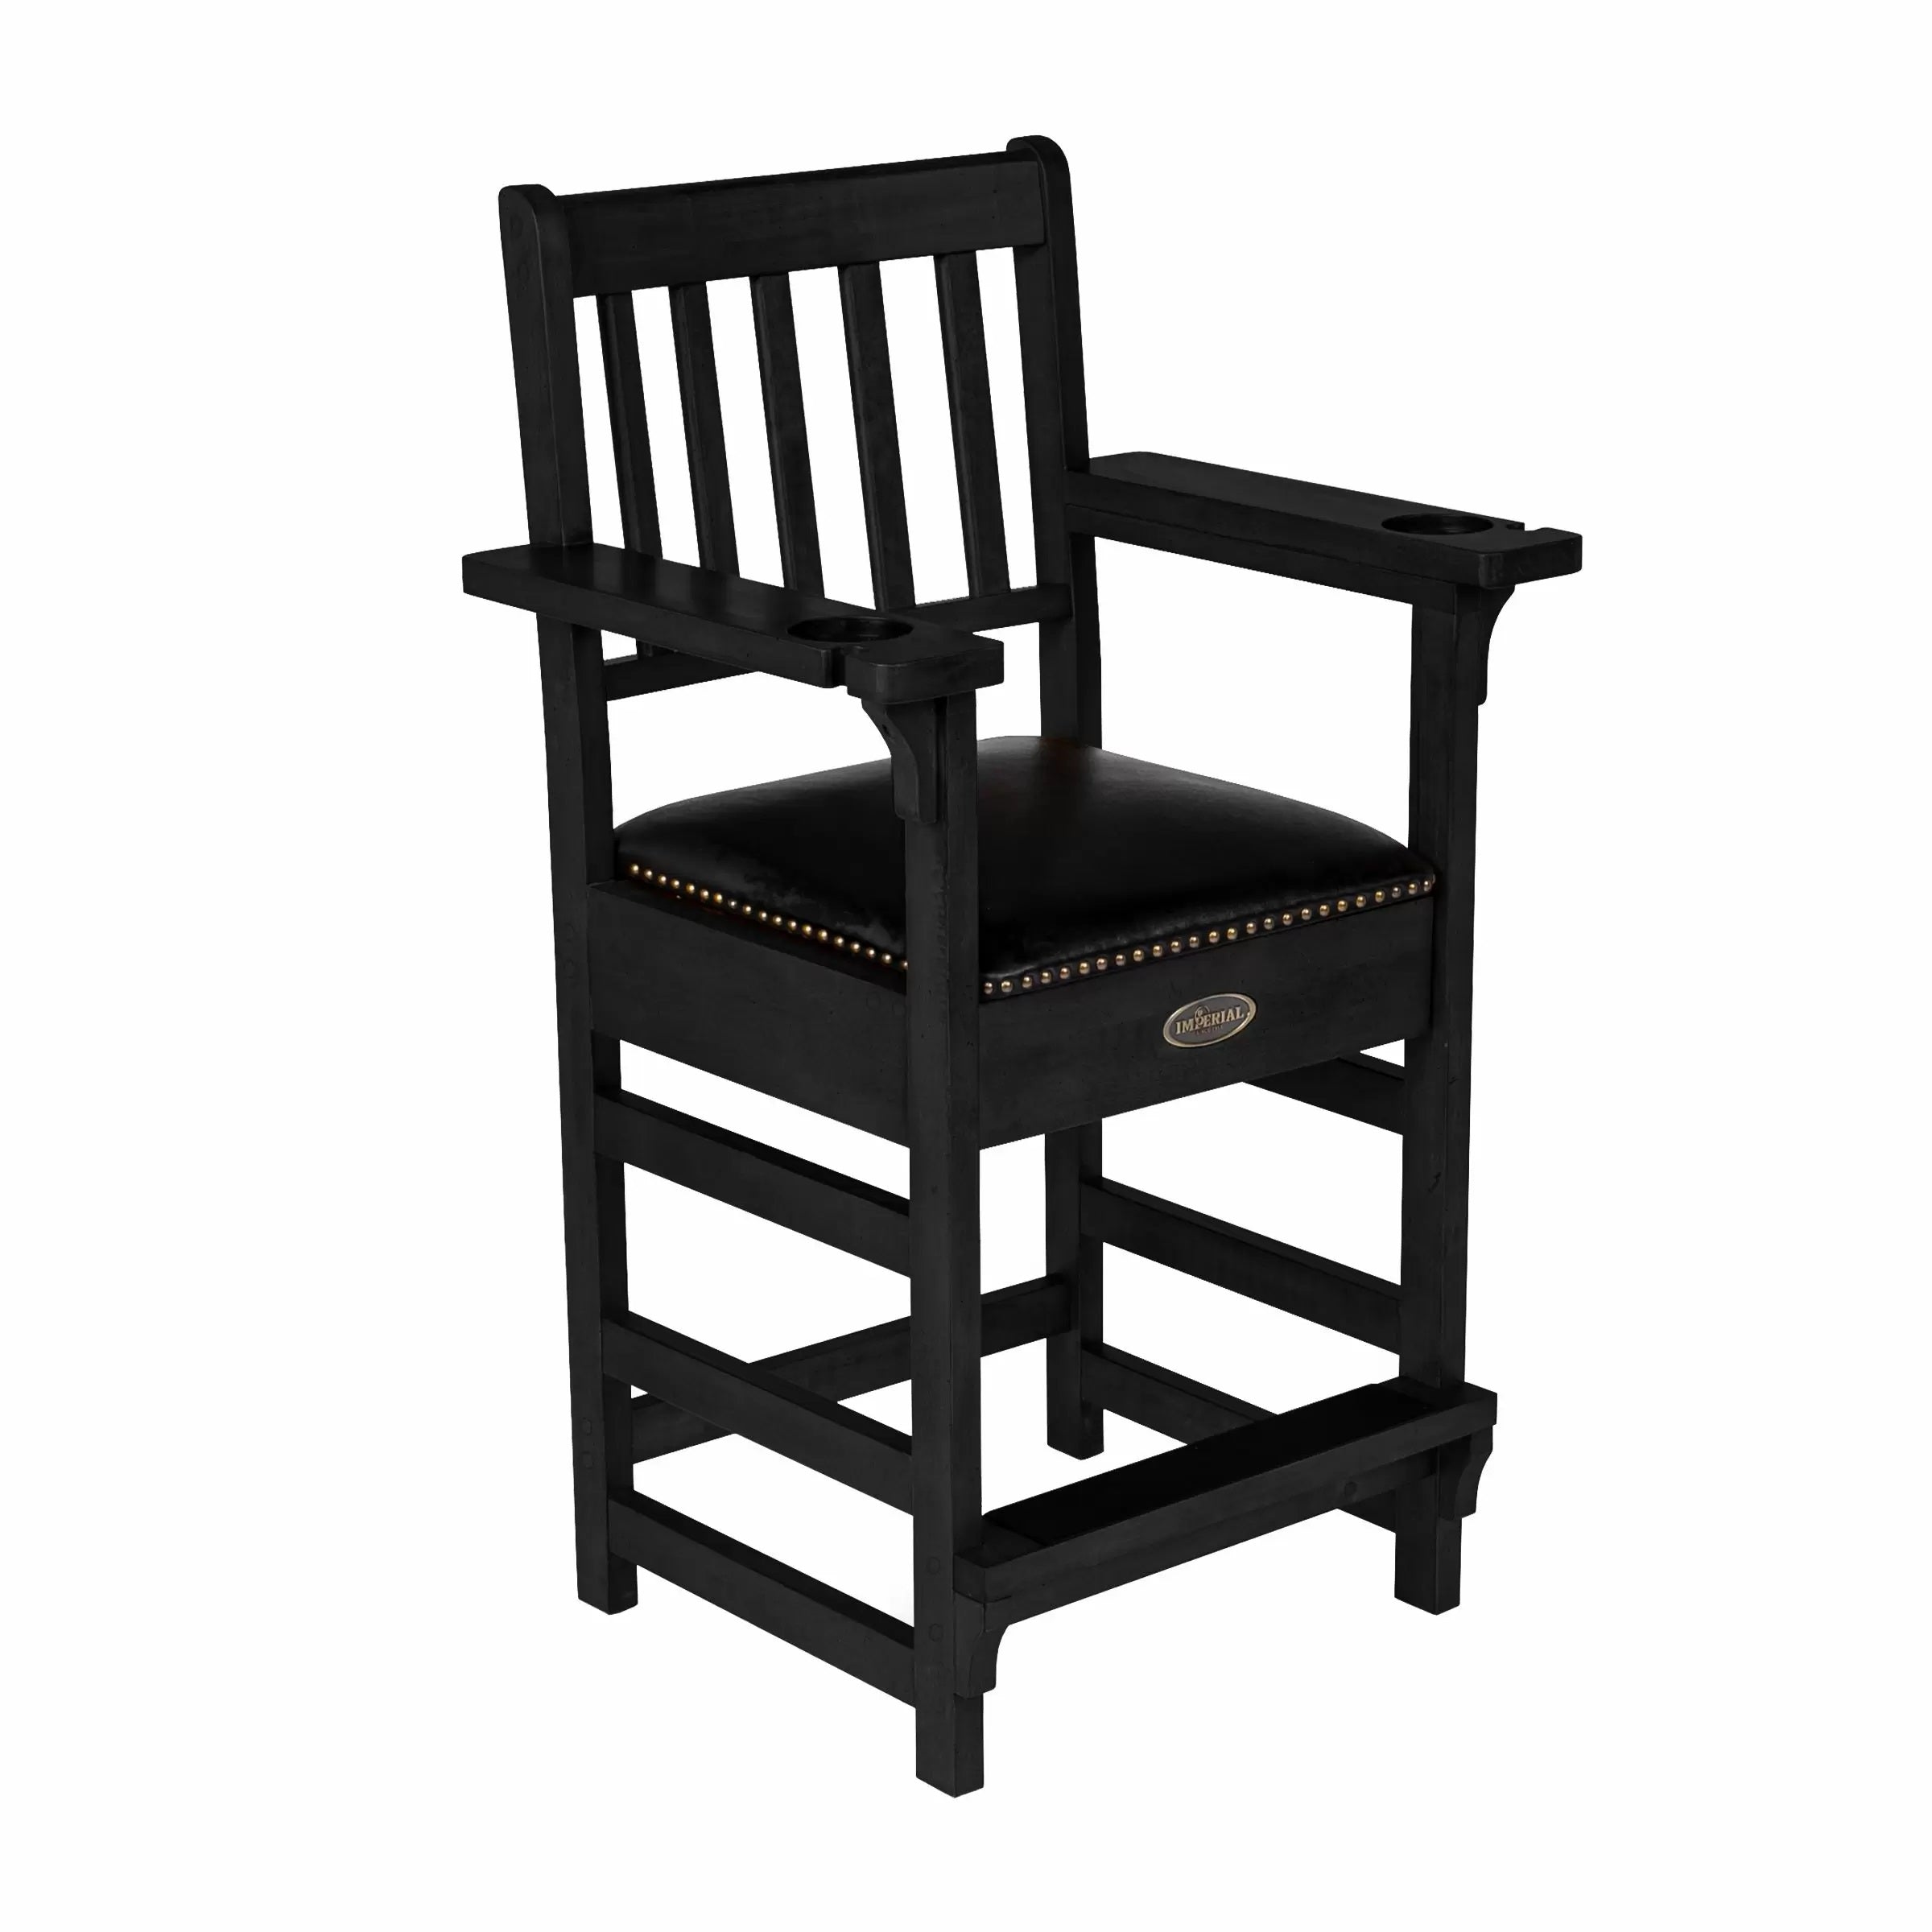 Imperial USA Premium Spectator Chair with Drawer Black right angle